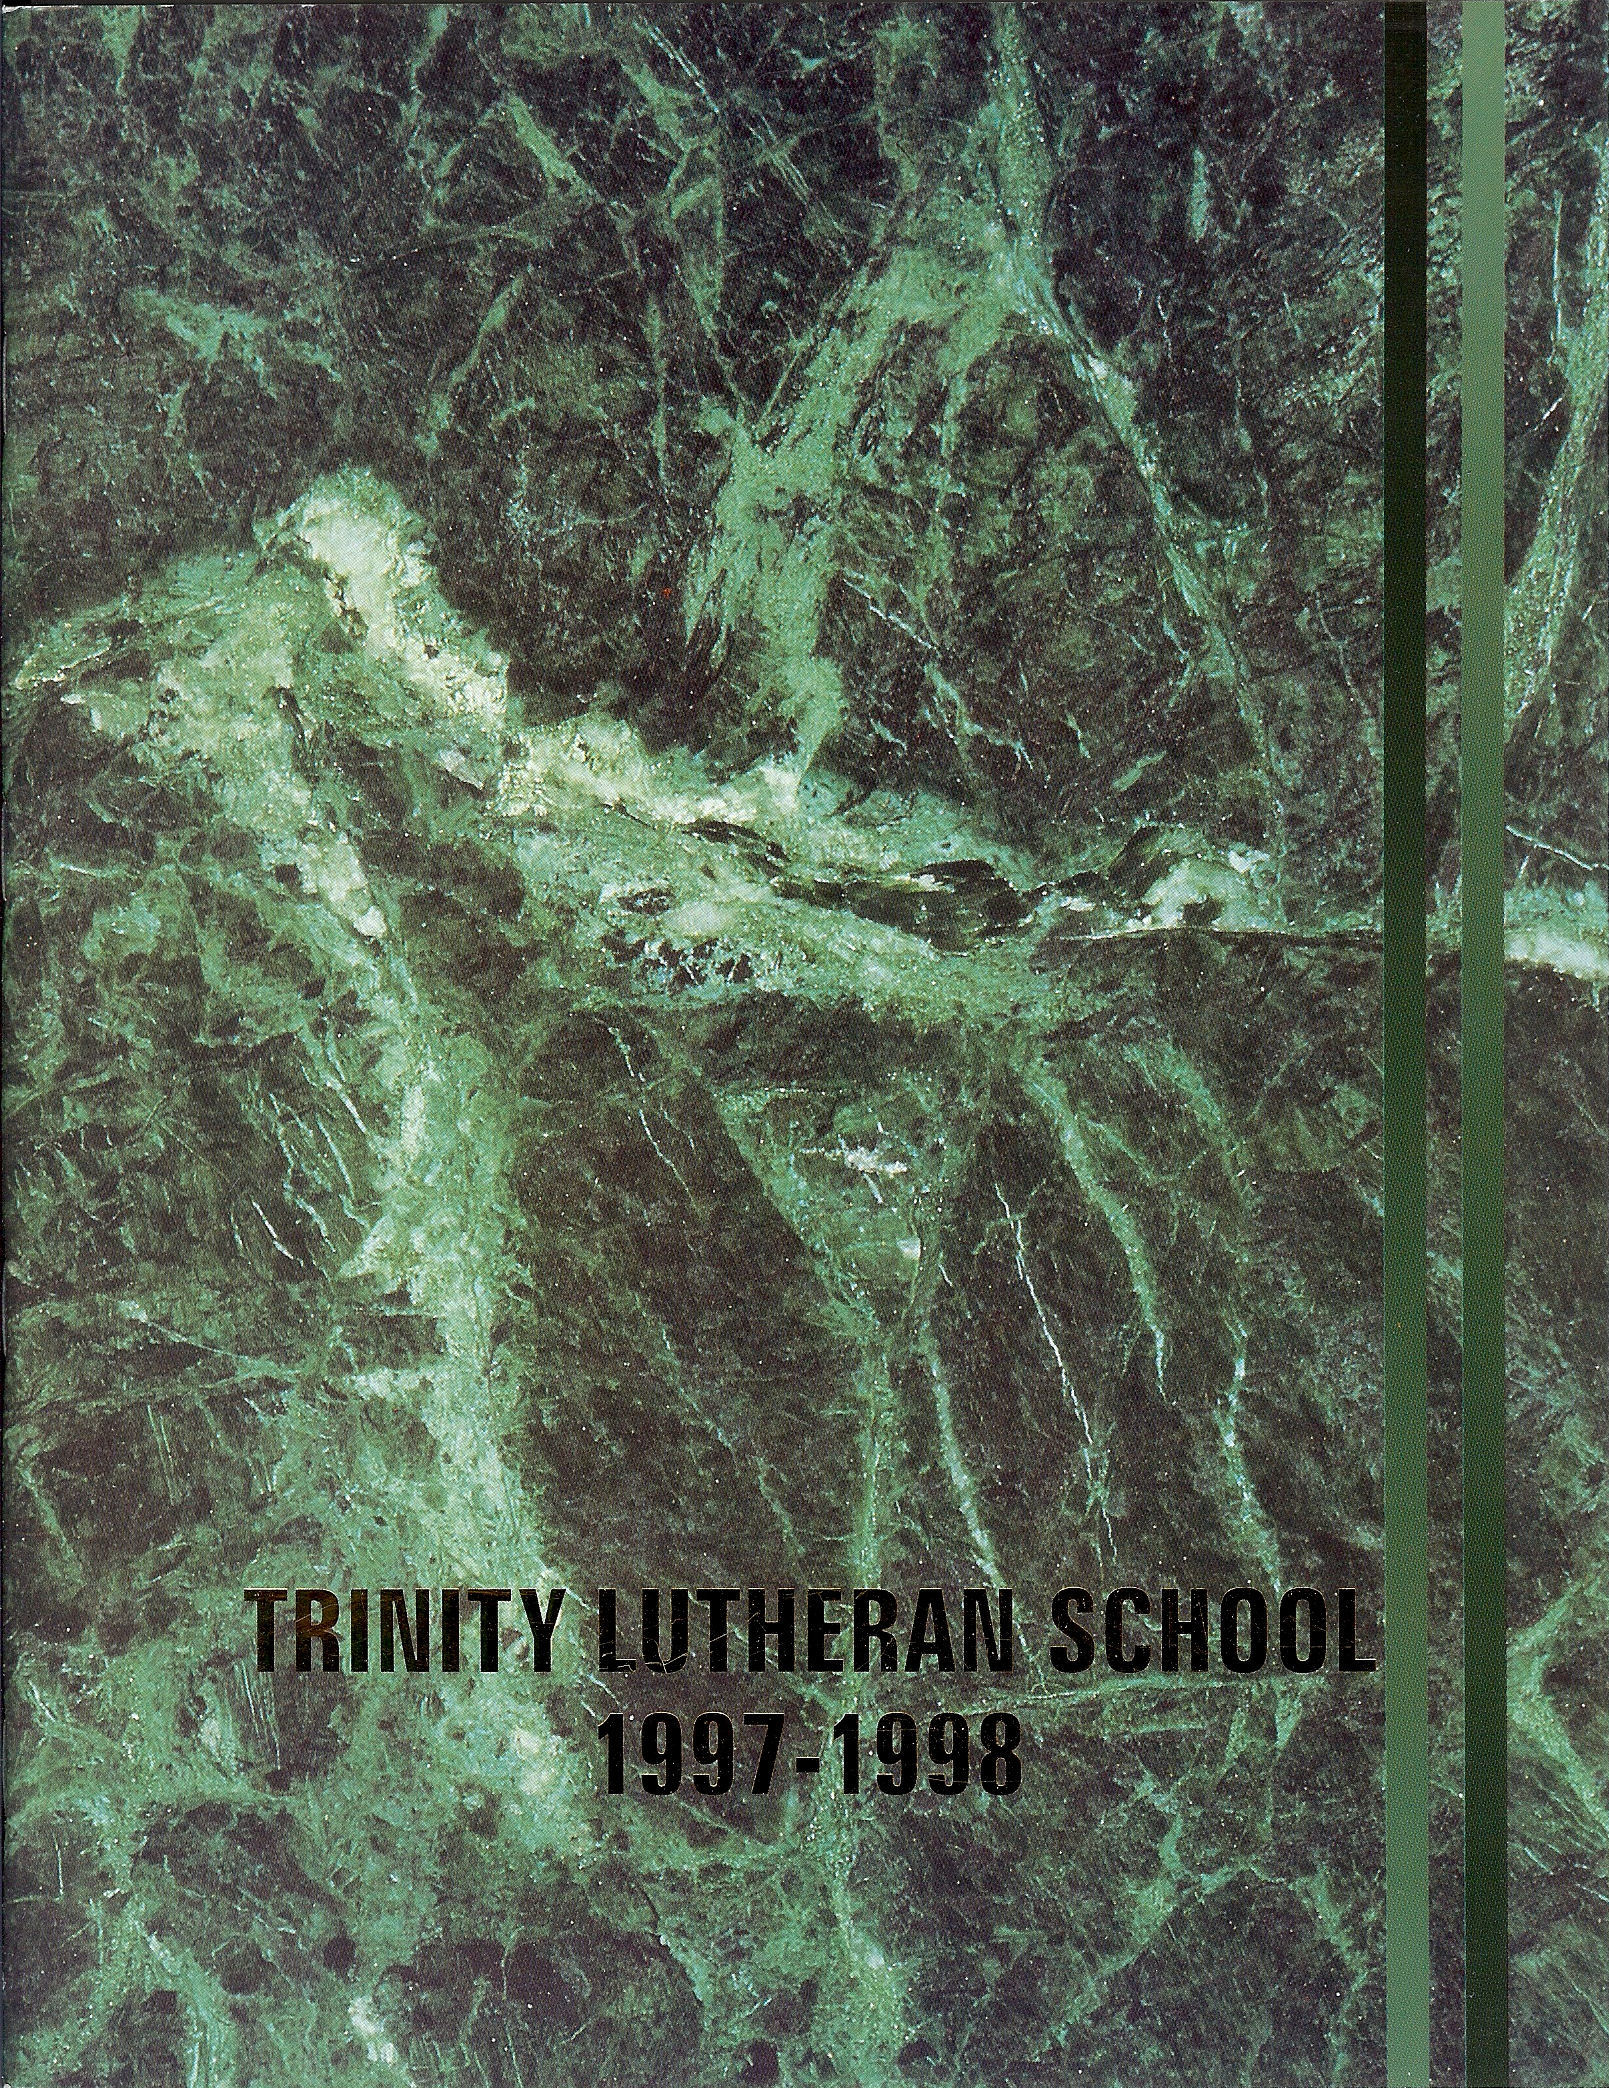 97 - 98 Yearbook Cover